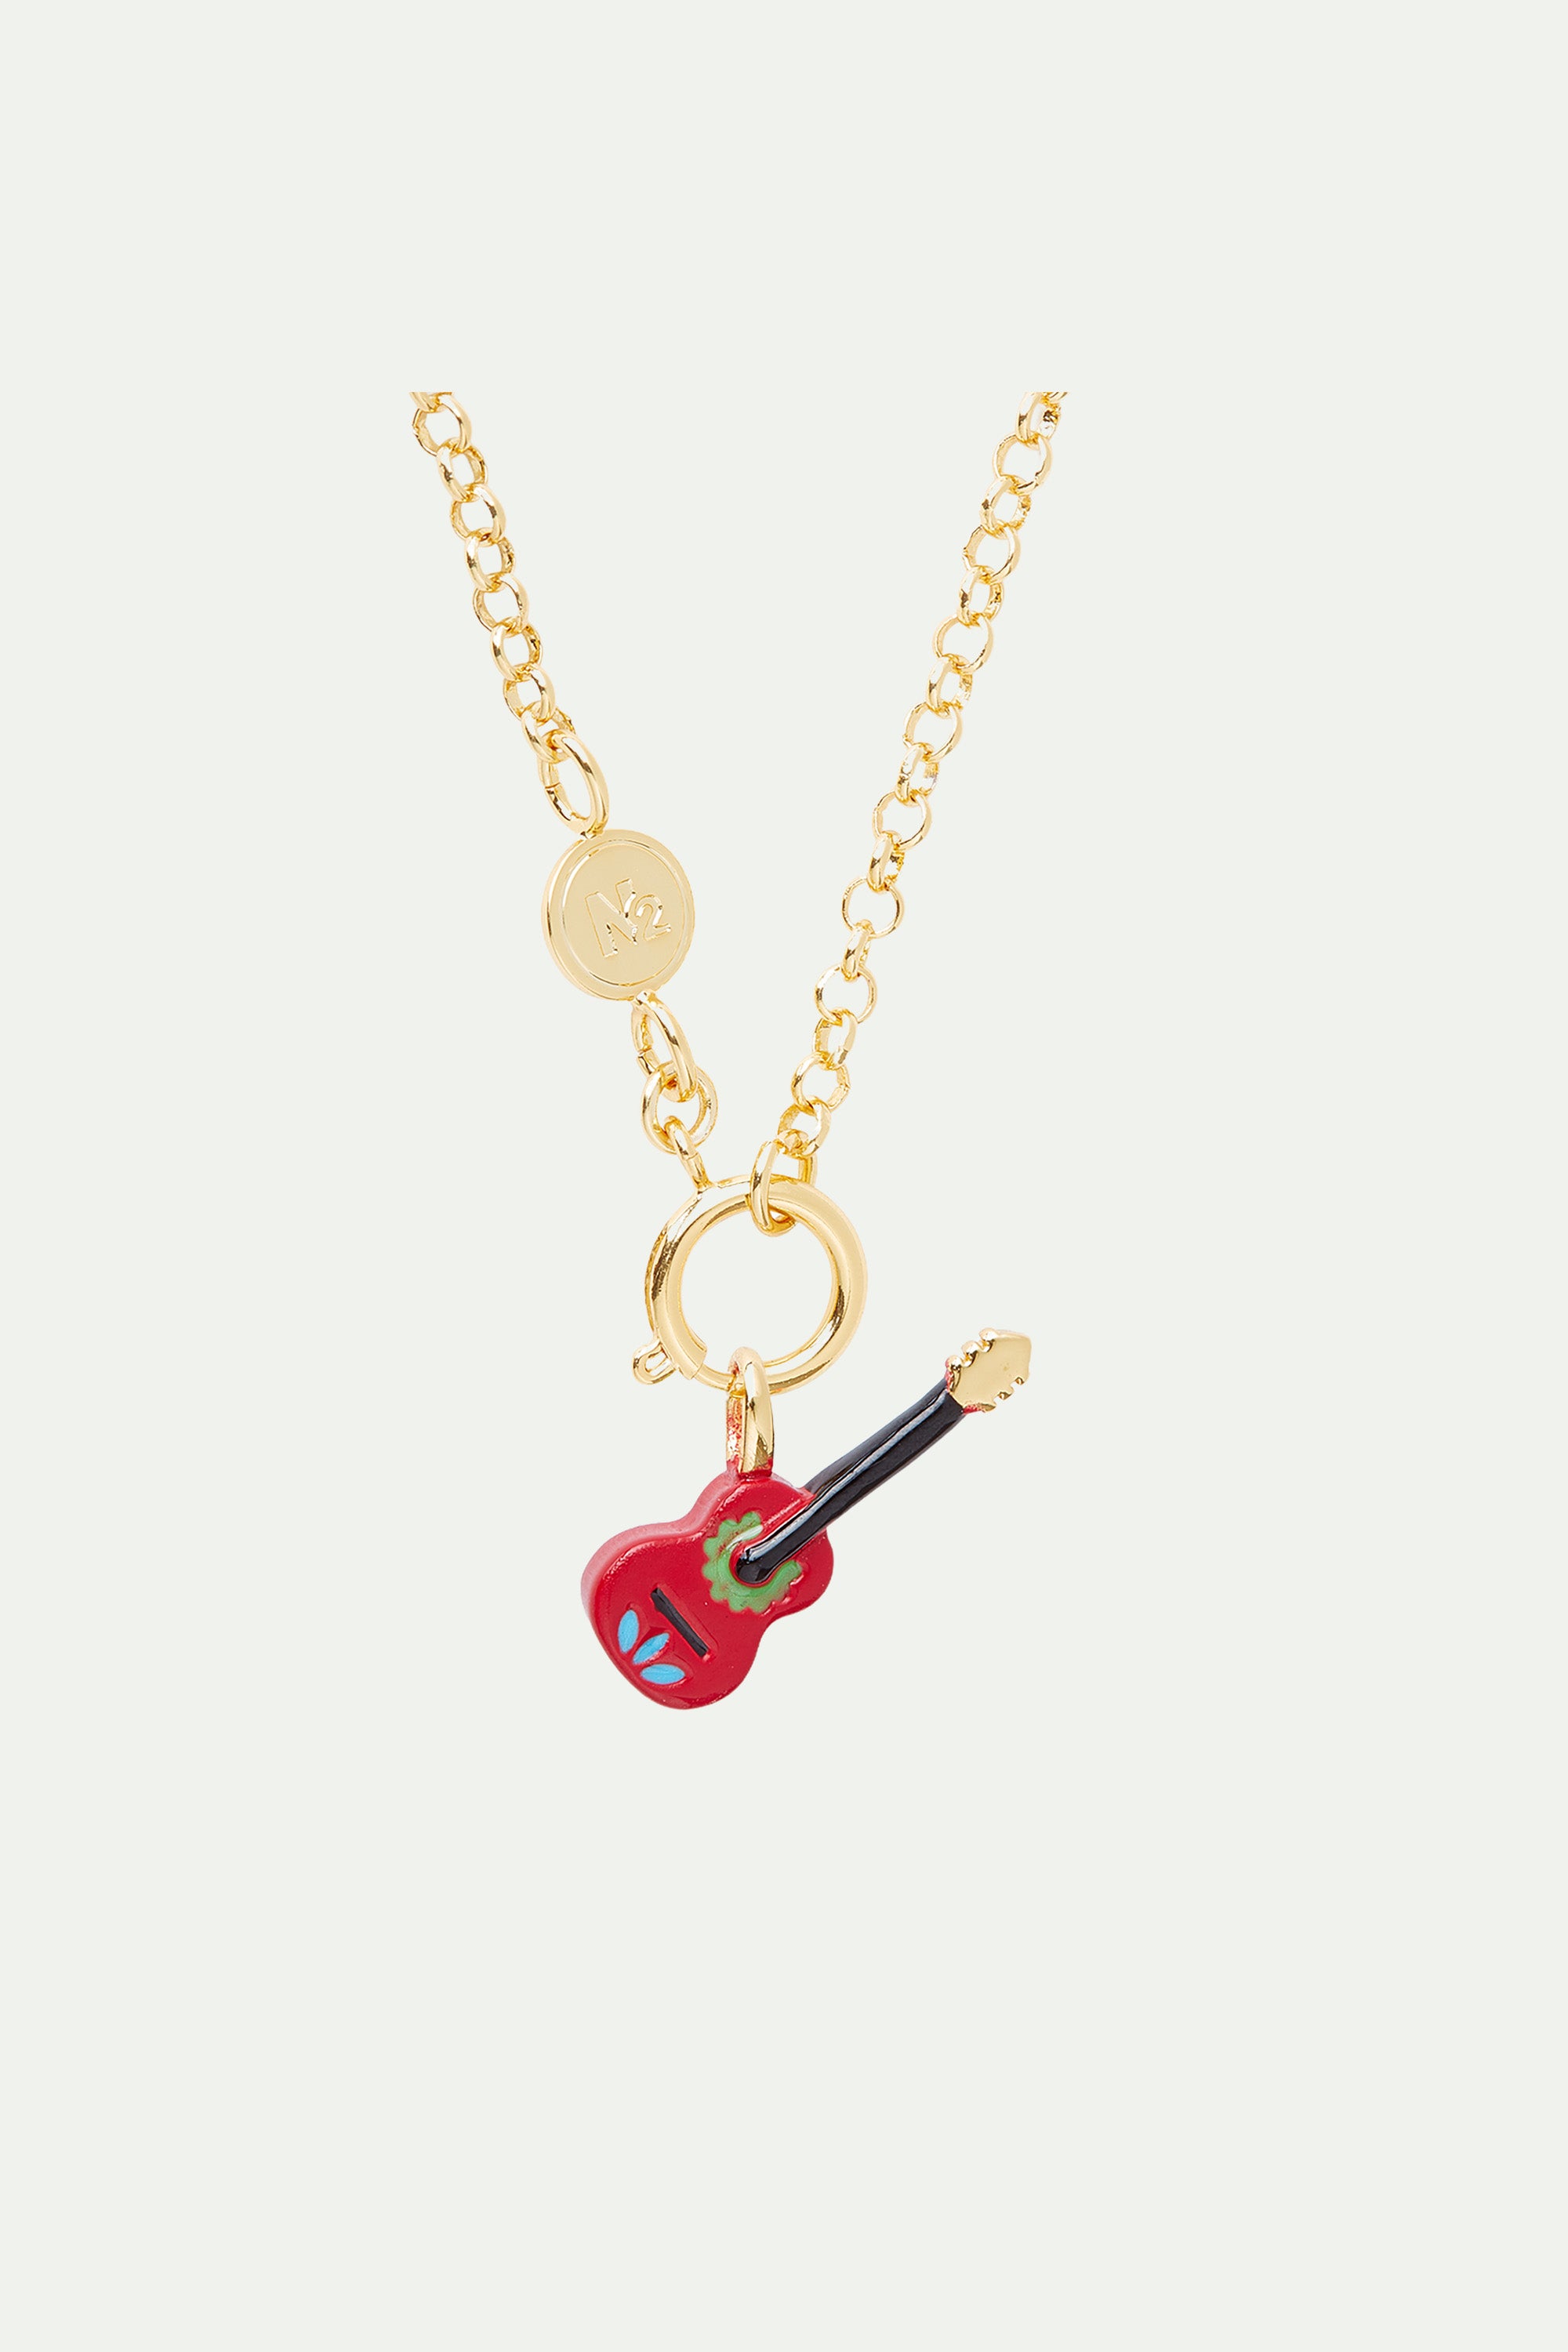 Charm's guitare mexicaine